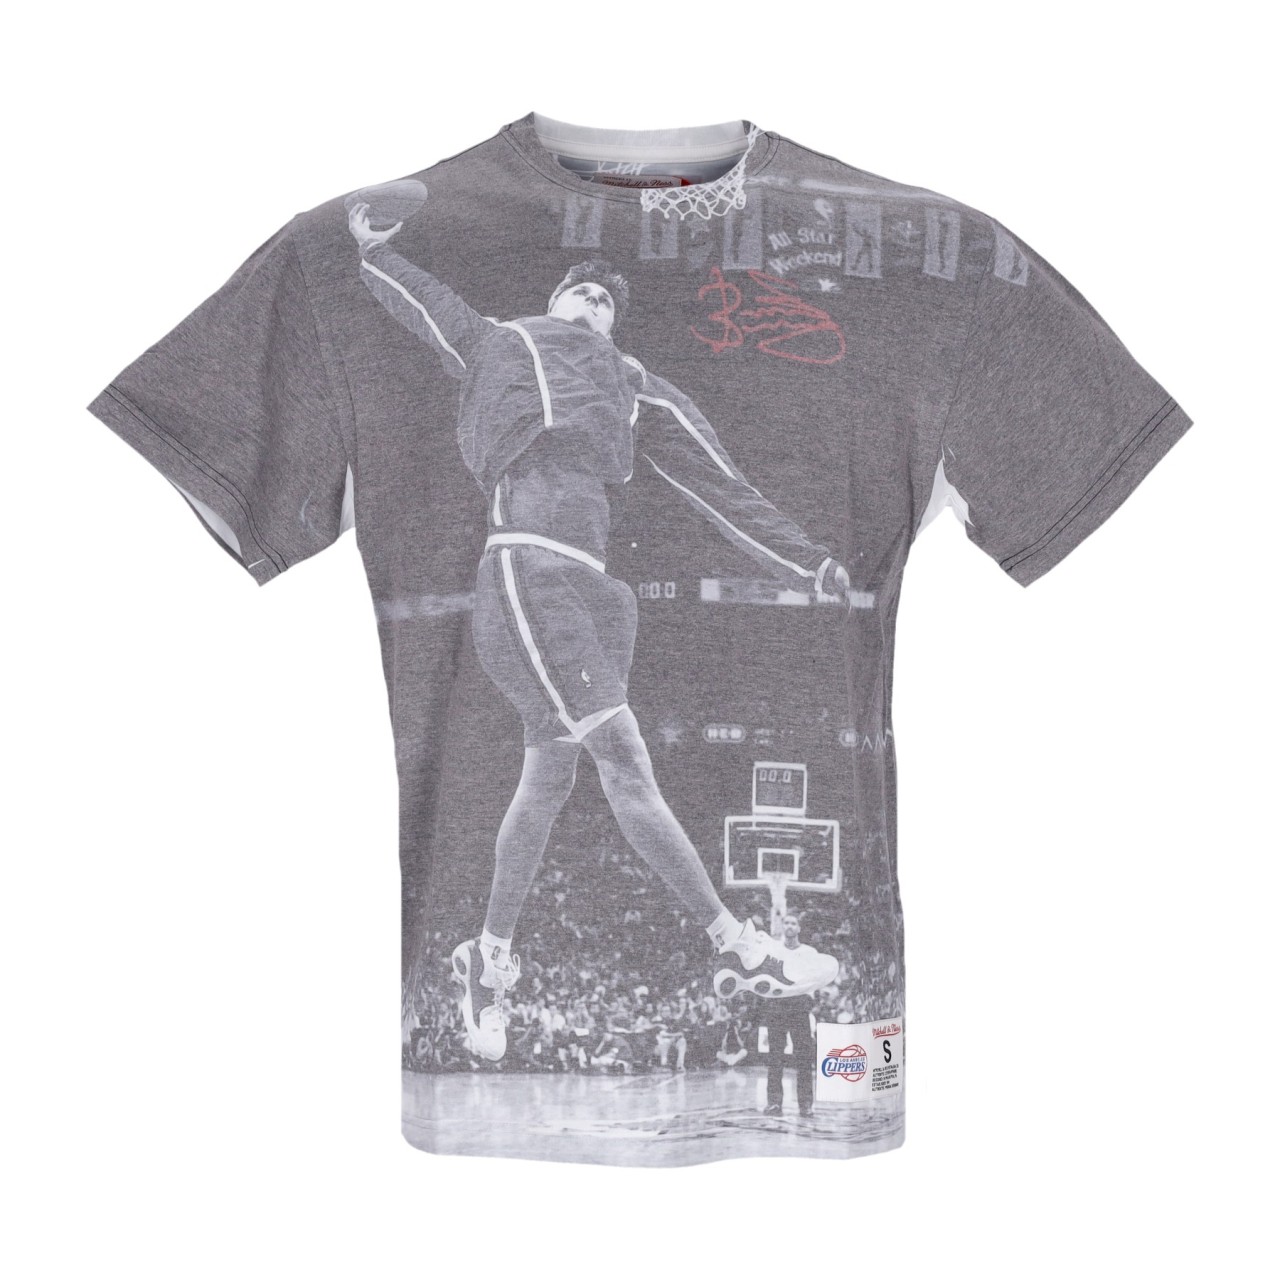 MITCHELL & NESS NBA ABOVE THE RIM SUBLIMATED TEE HARDWOOD CLASSICS BRENT BARRY LOSCLI TCRW3401-LACYYBBYWHIT